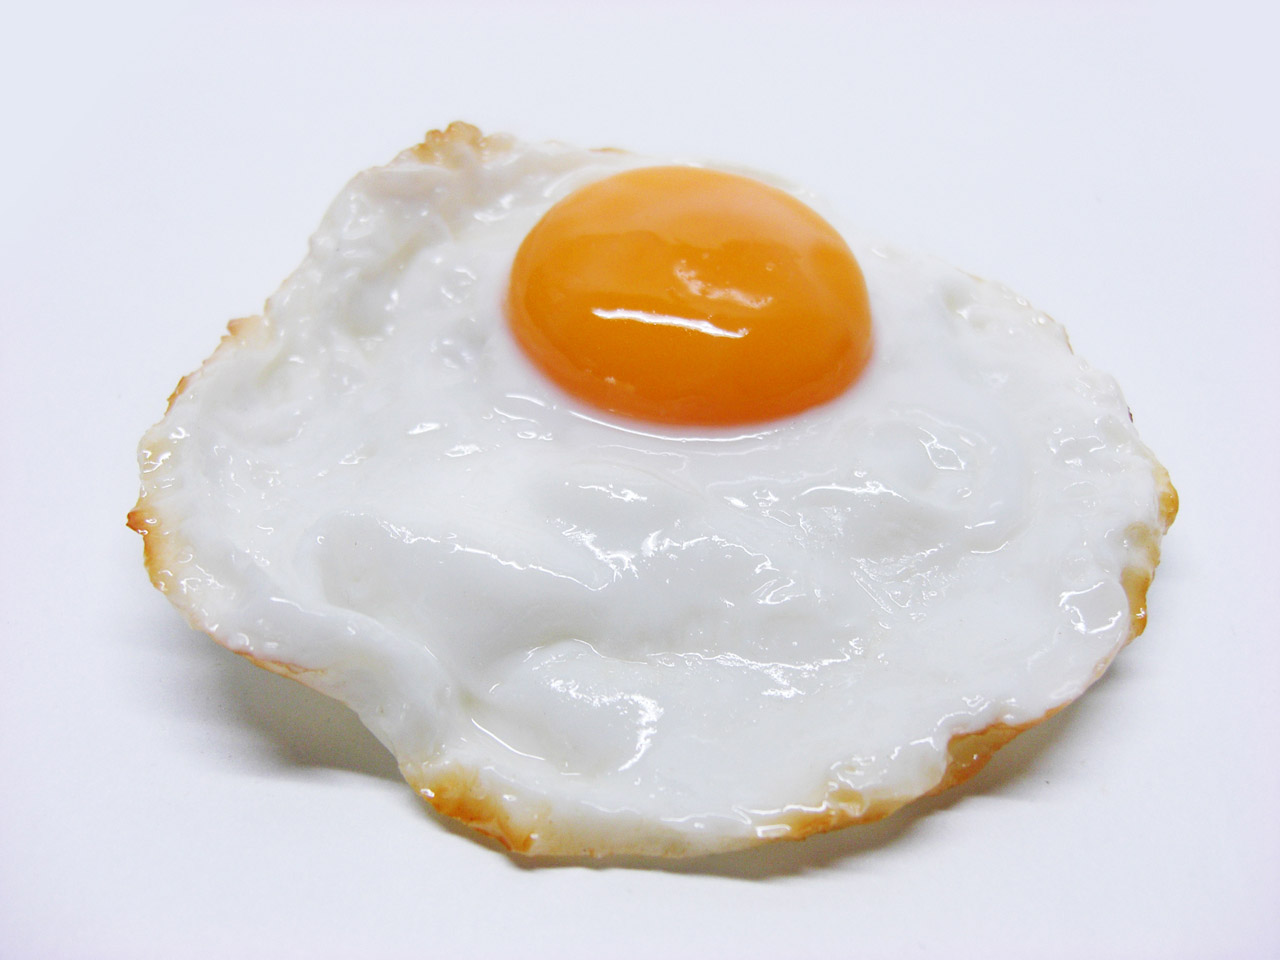 Sunny-side-up (fried Eggs)